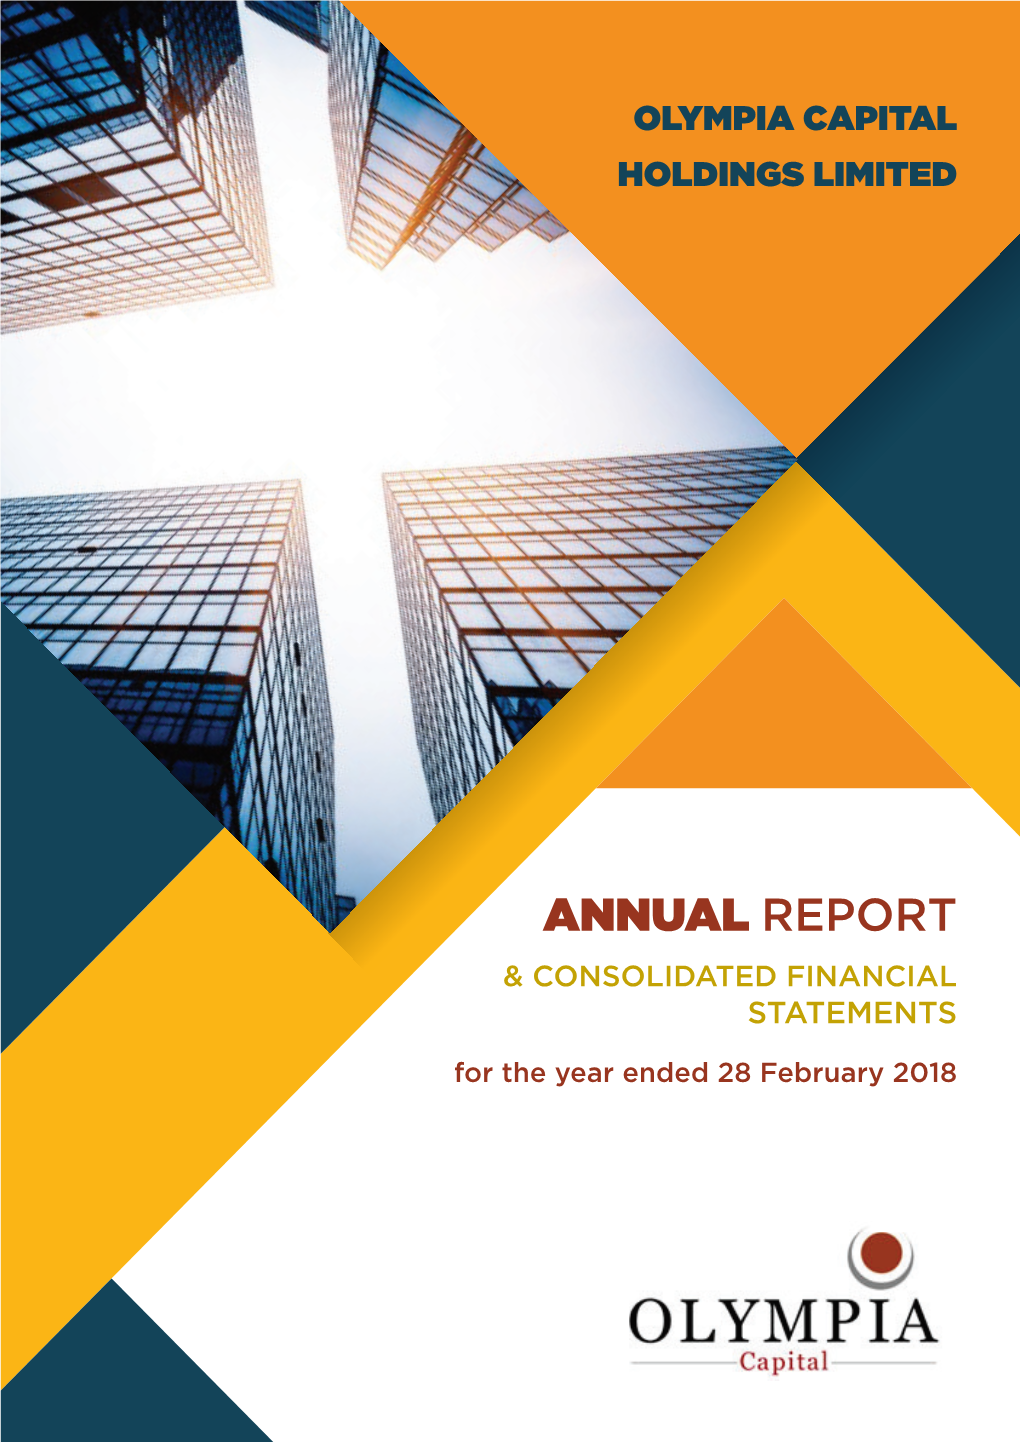 ANNUAL REPORT & CONSOLIDATED FINANCIAL STATEMENTS for the Year Ended 28 February 2018